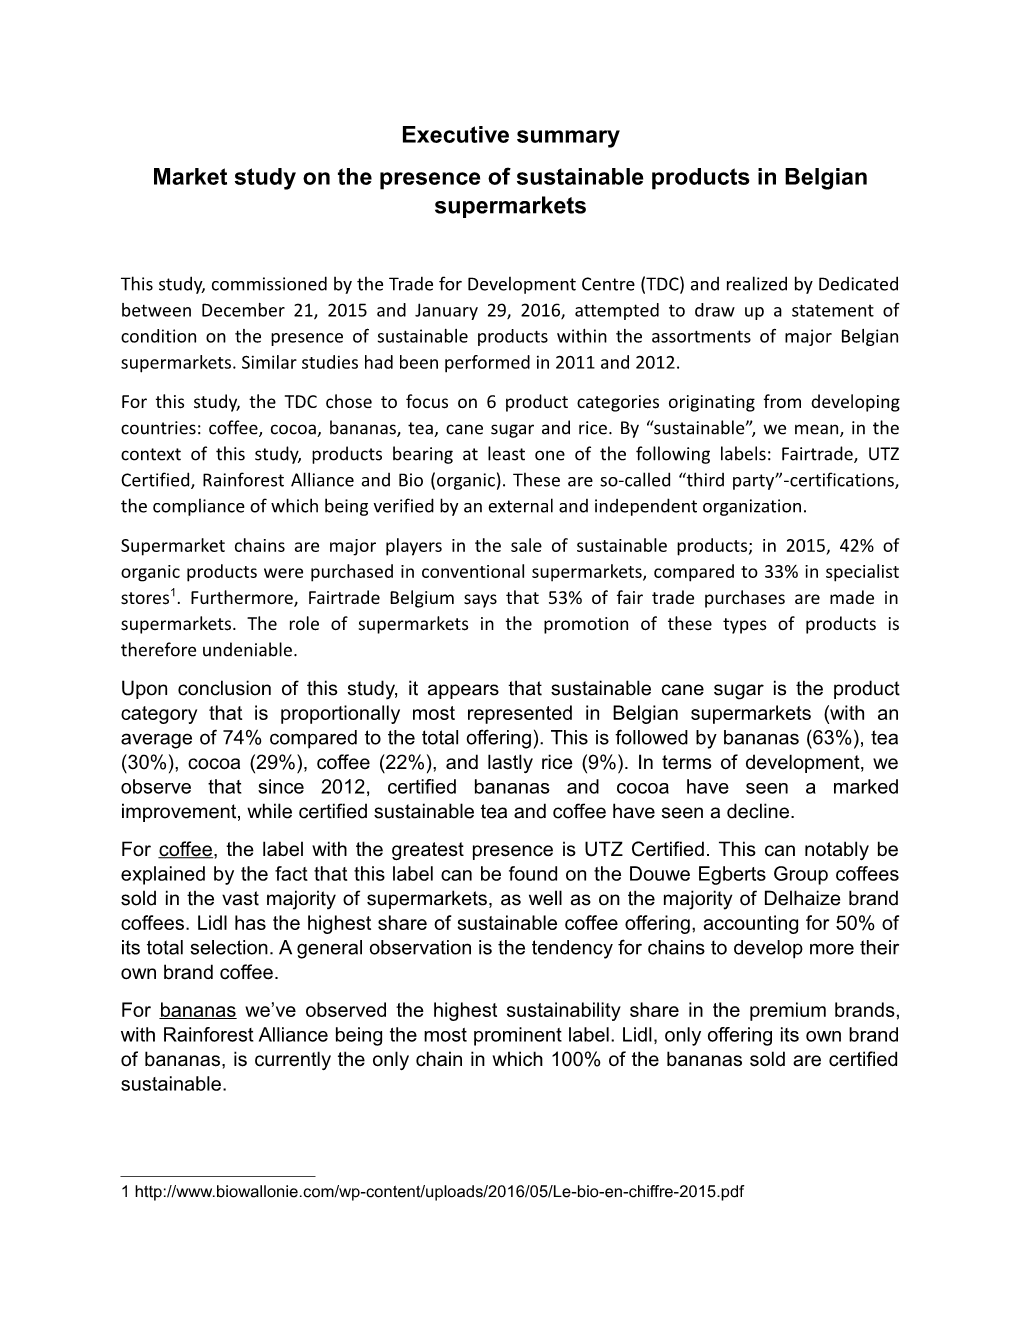 Market Study on the Presence of Sustainable Products in Belgian Supermarkets